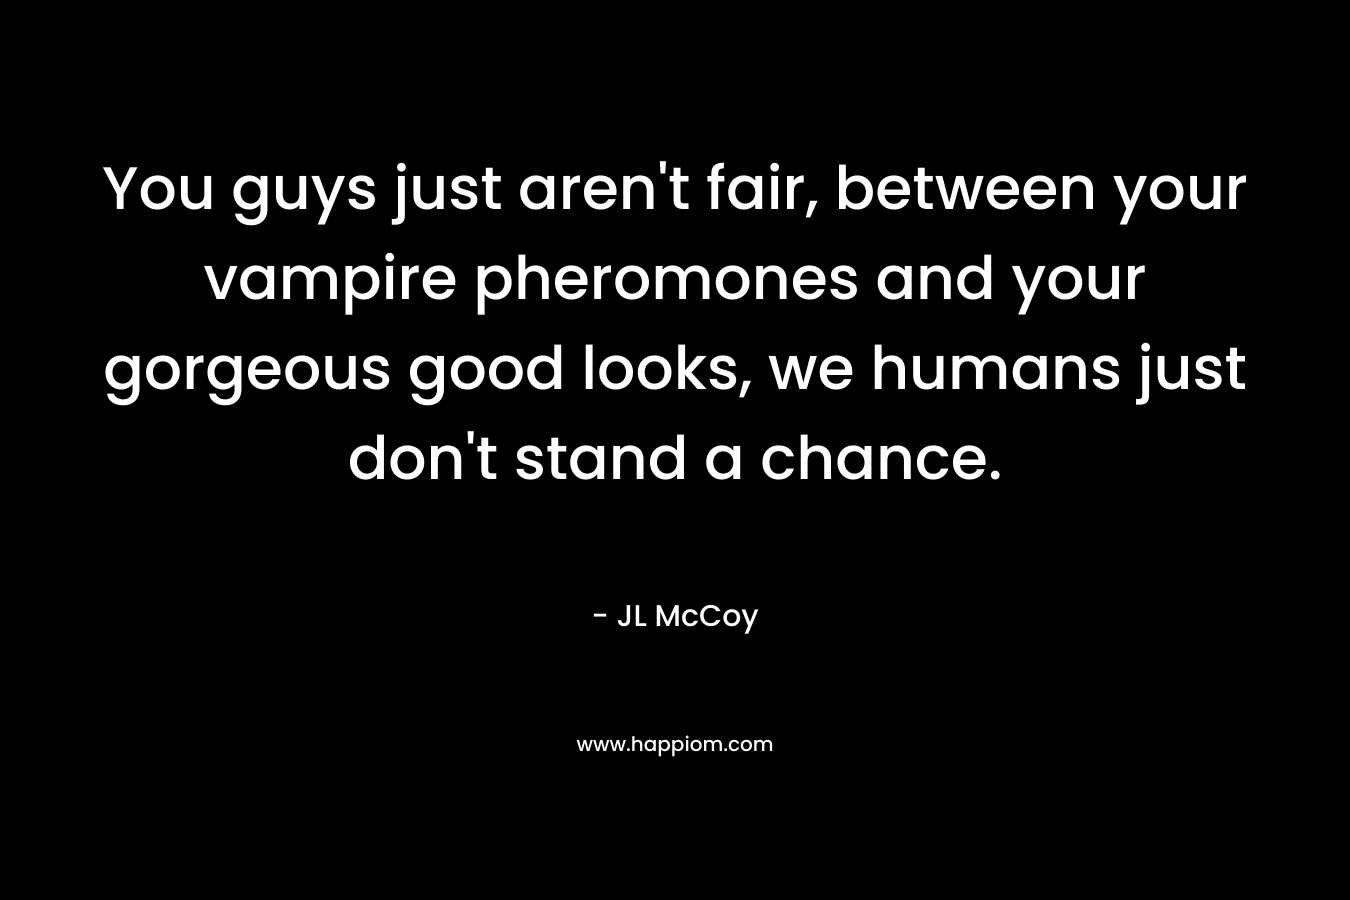 You guys just aren't fair, between your vampire pheromones and your gorgeous good looks, we humans just don't stand a chance.